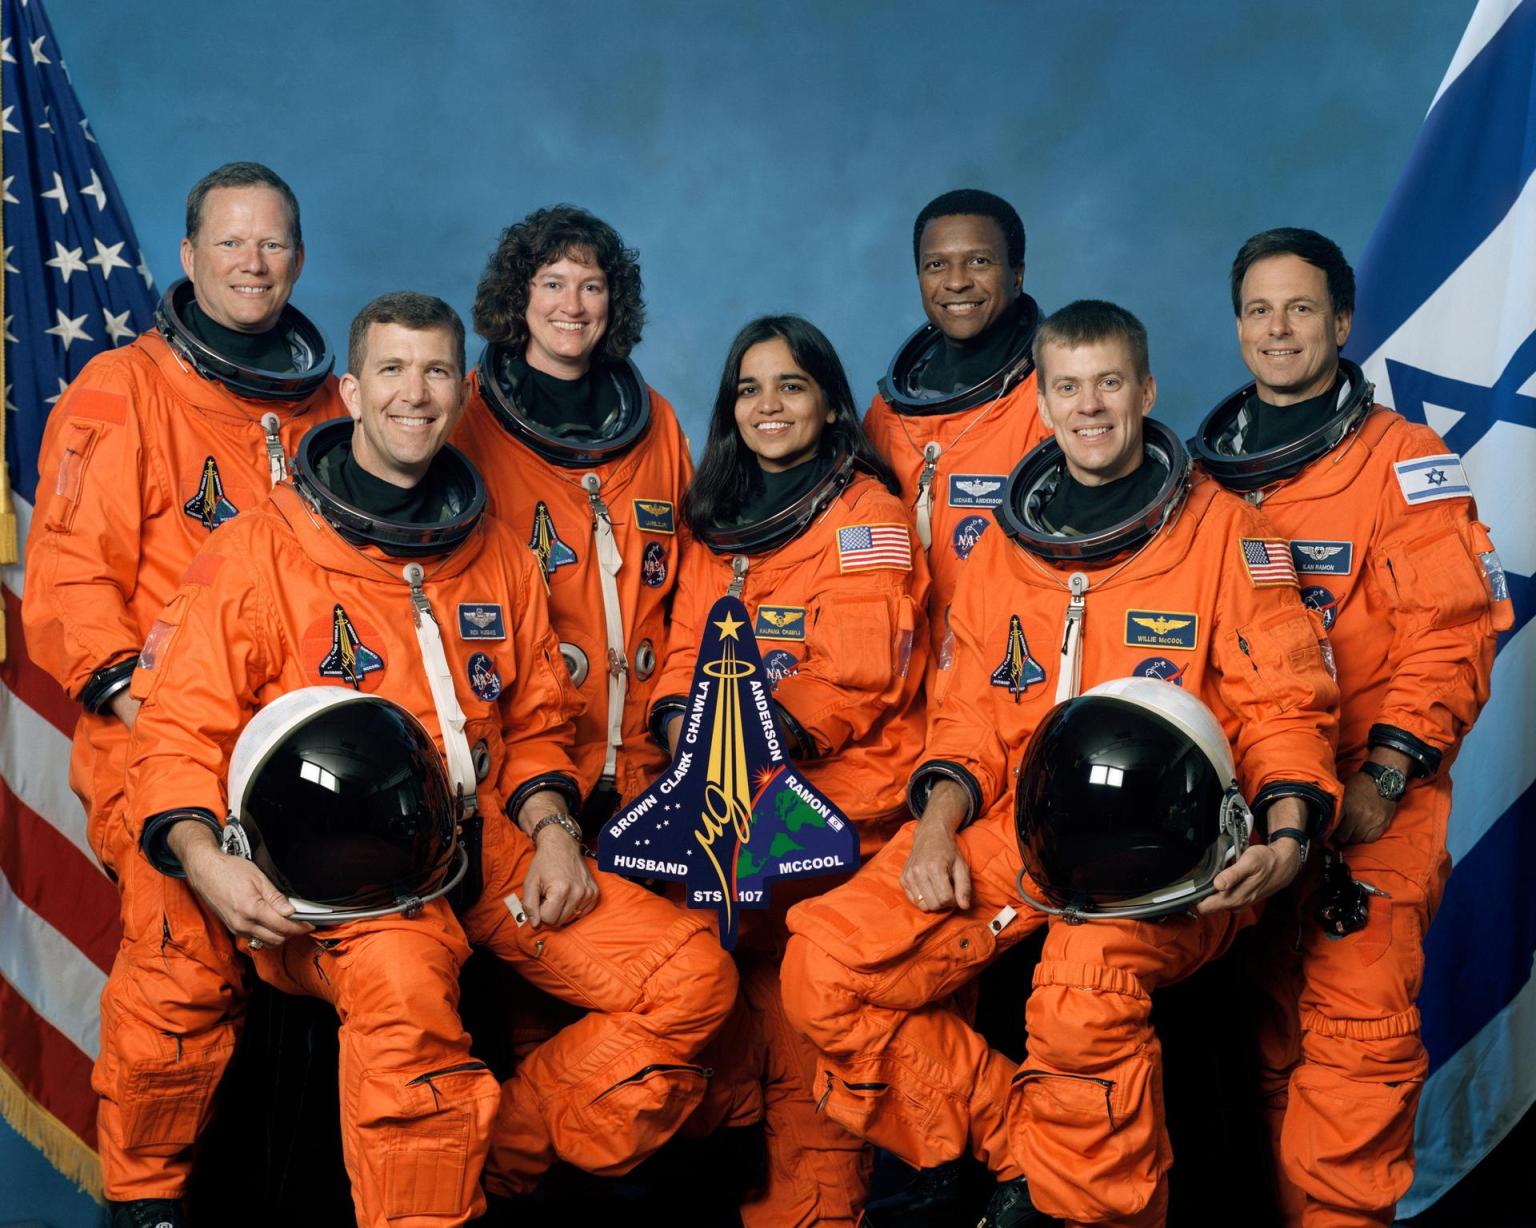 STS-107 Crew Seated in front, from left, are: Astronauts Rick D. Husband, mission commander; Kalpana Chawla, mission specialist; and William C. McCool, pilot. Standing, from left, are: David M. Brown, Laurel B. Clark, and Michael P. Anderson, all mission specialists; and Ilan Ramon, payload specialist.